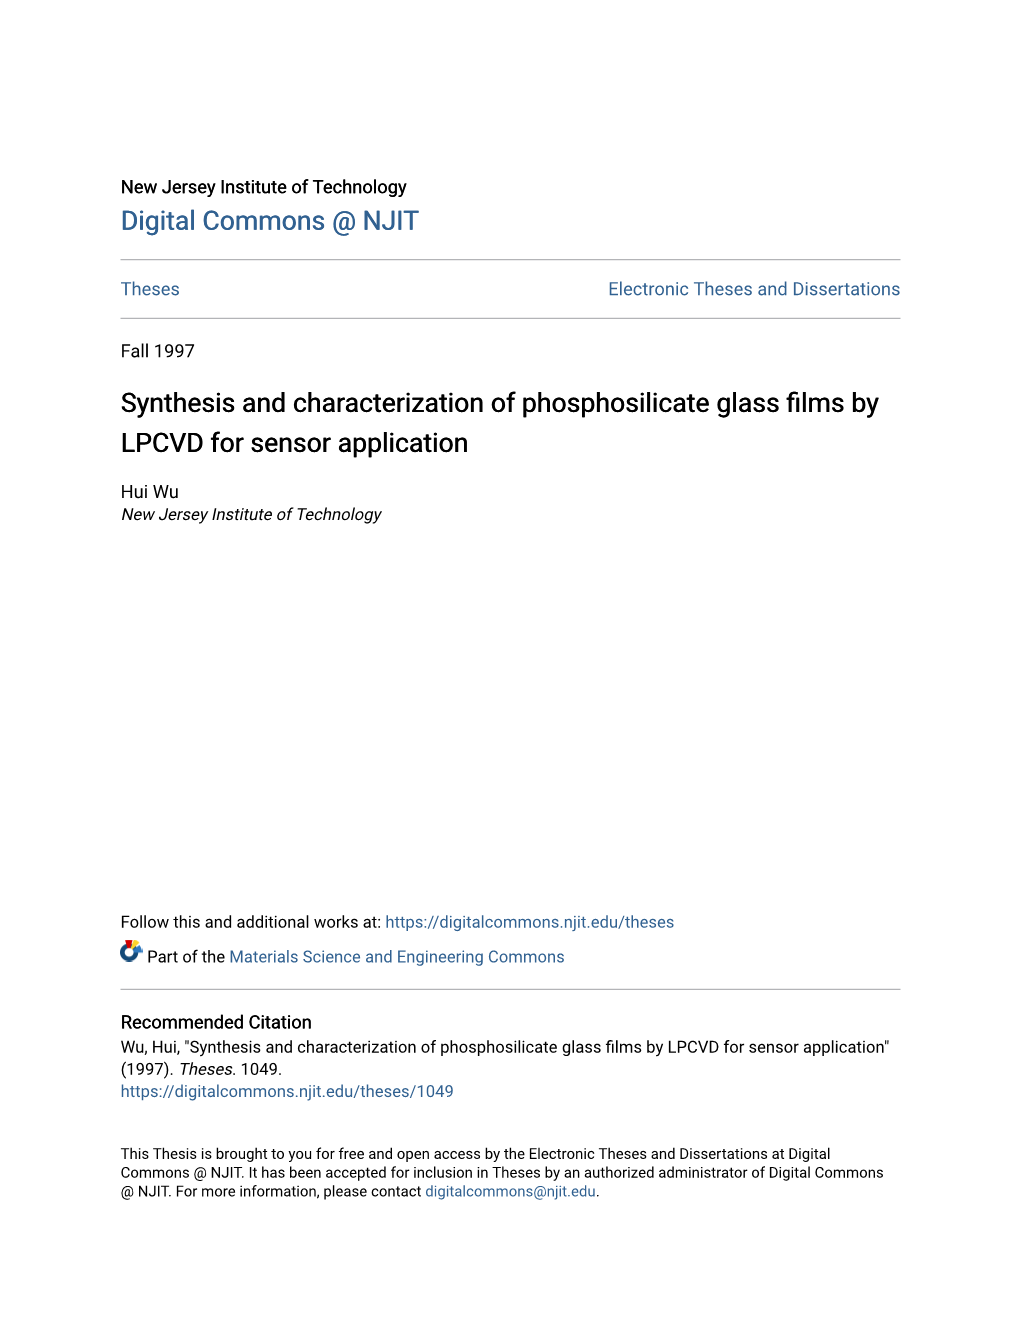 Synthesis and Characterization of Phosphosilicate Glass Films by LPCVD for Sensor Application" (1997)